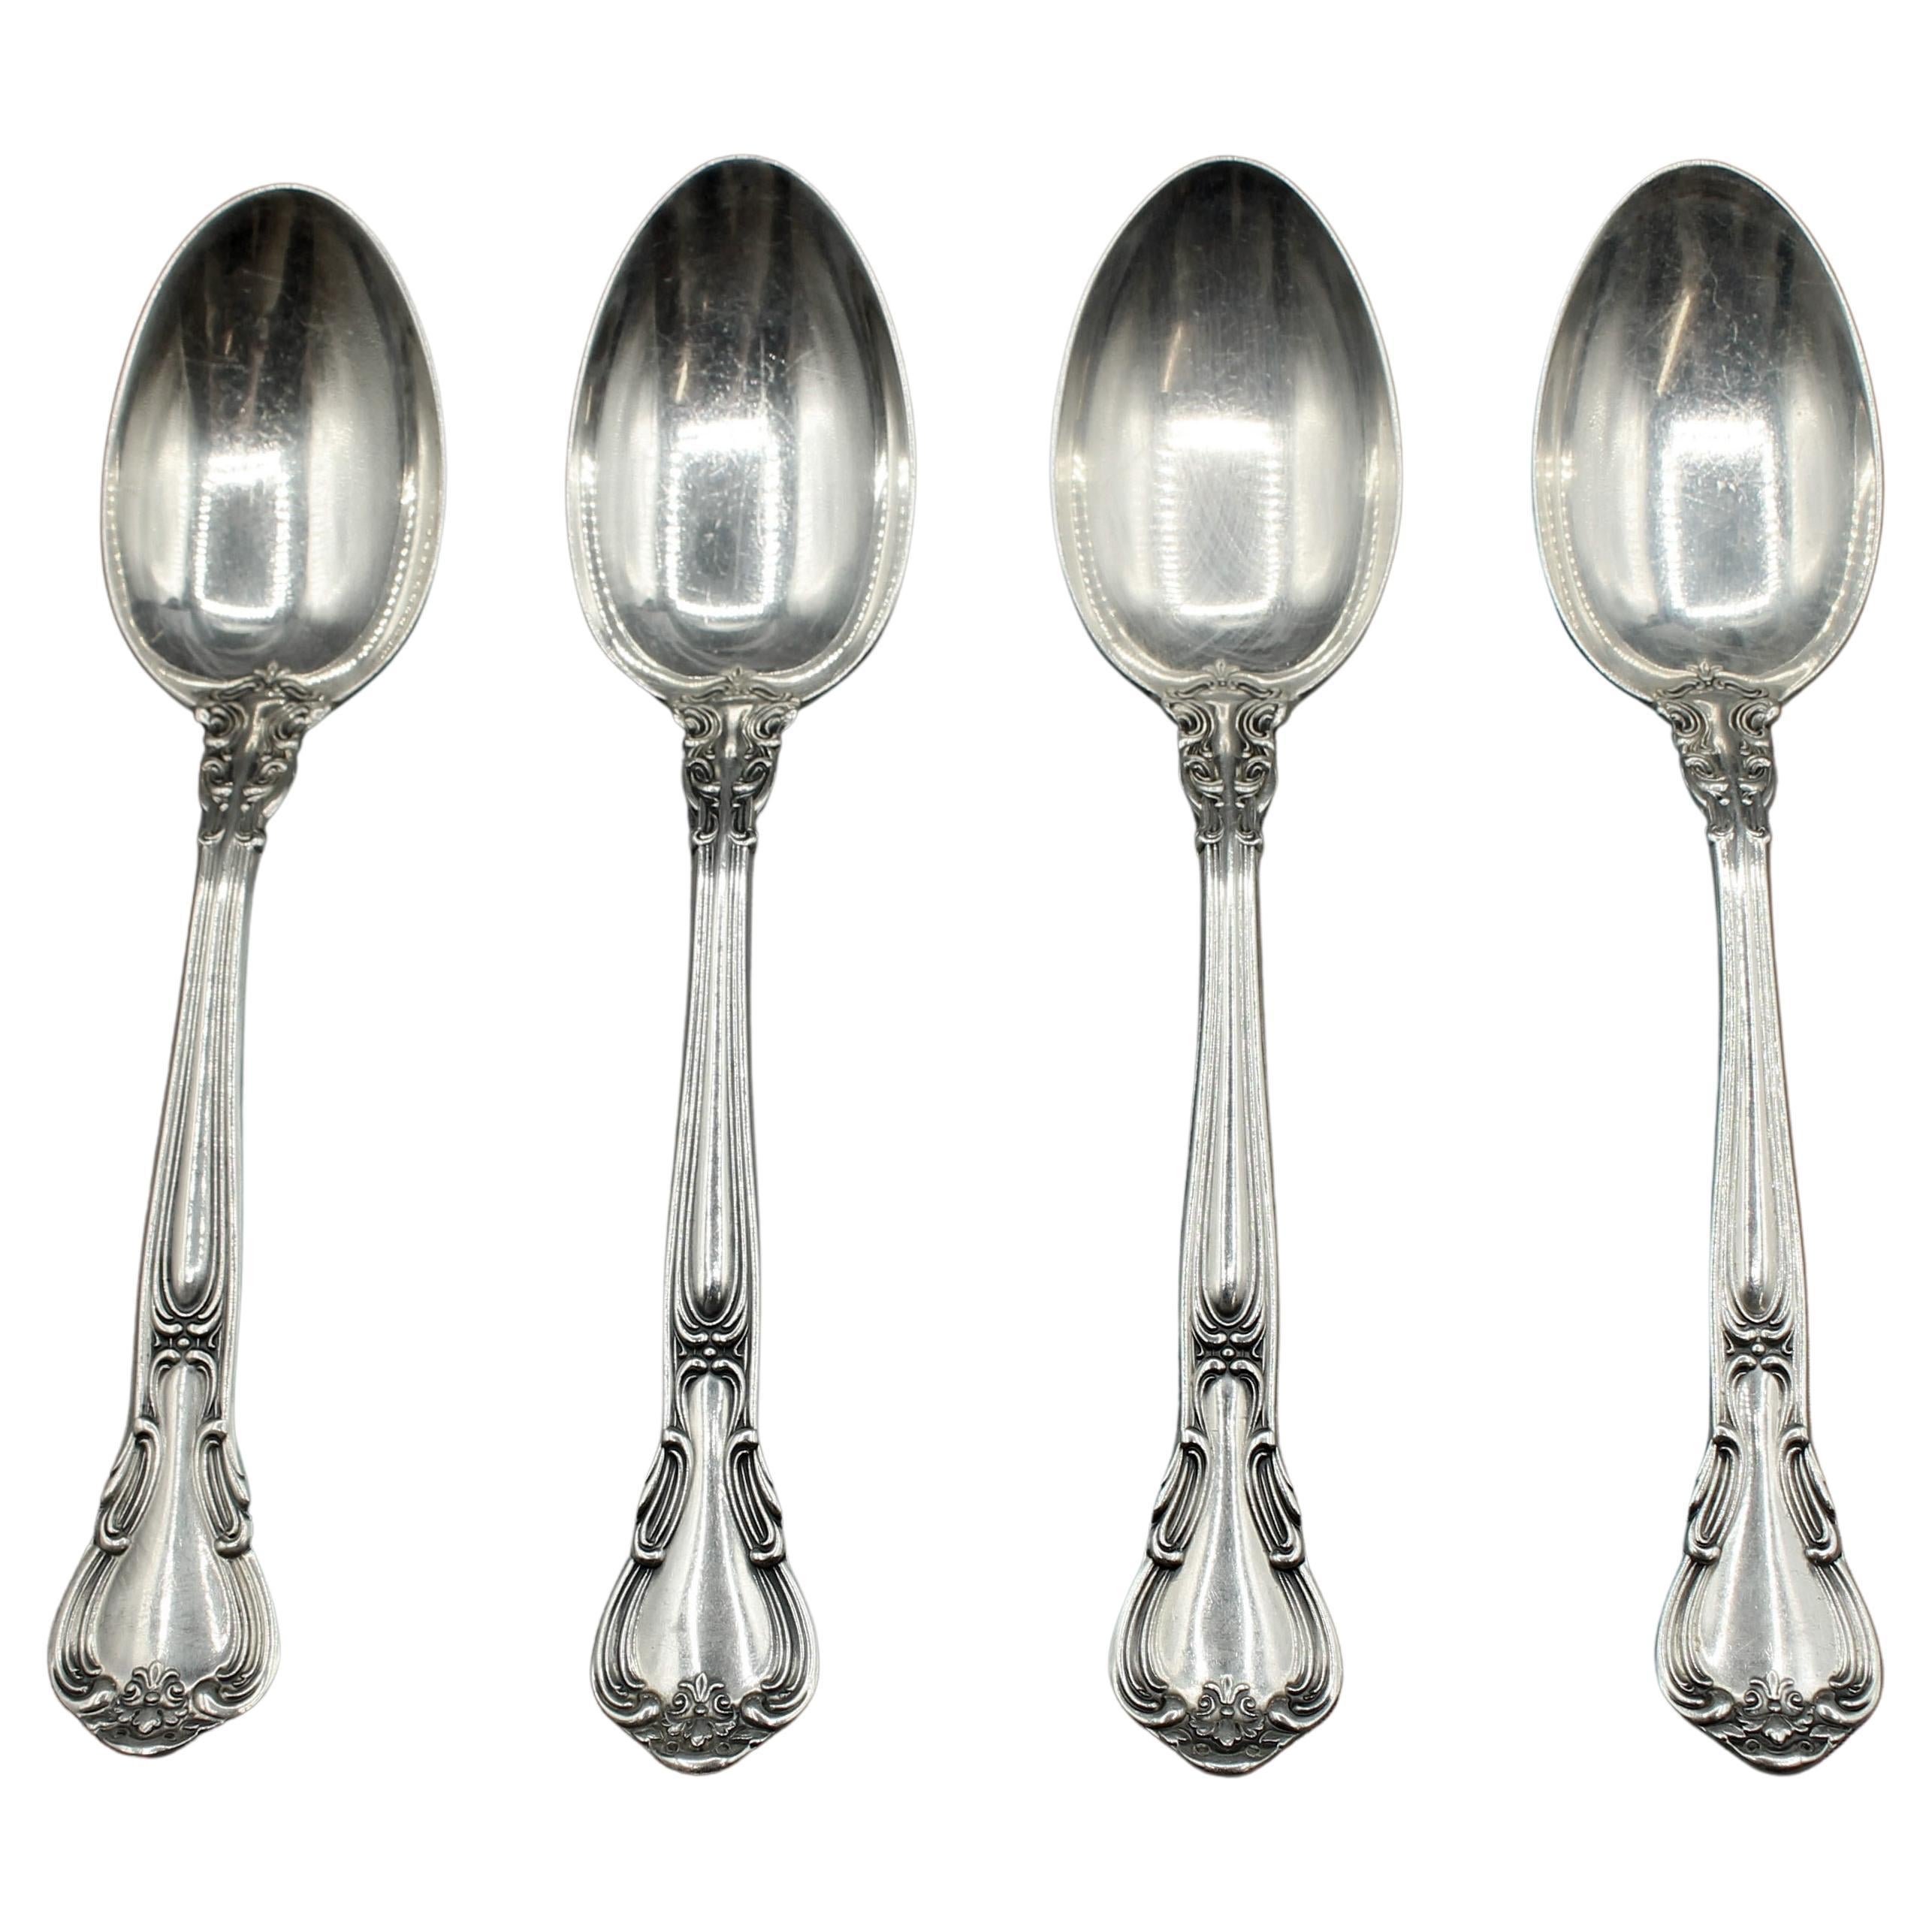 Circa 1970s Set of 4 Chantilly Sterling Teaspoons by Gorham For Sale